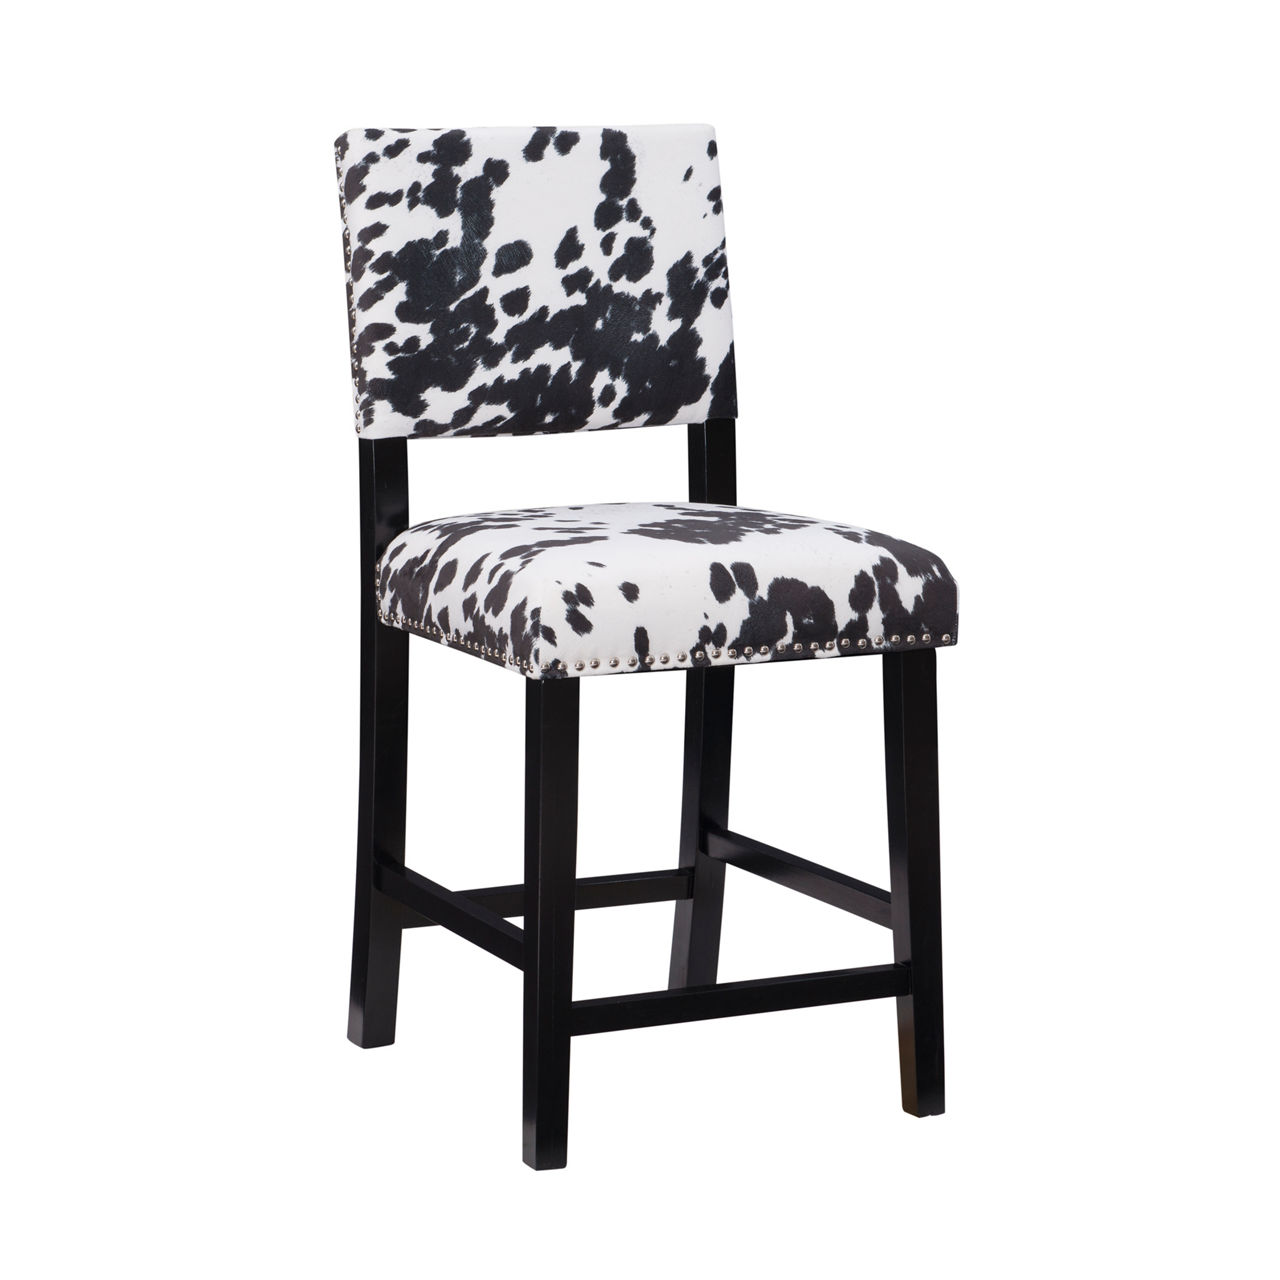 Marianne Black Cow Print Upholstered Counter Stool